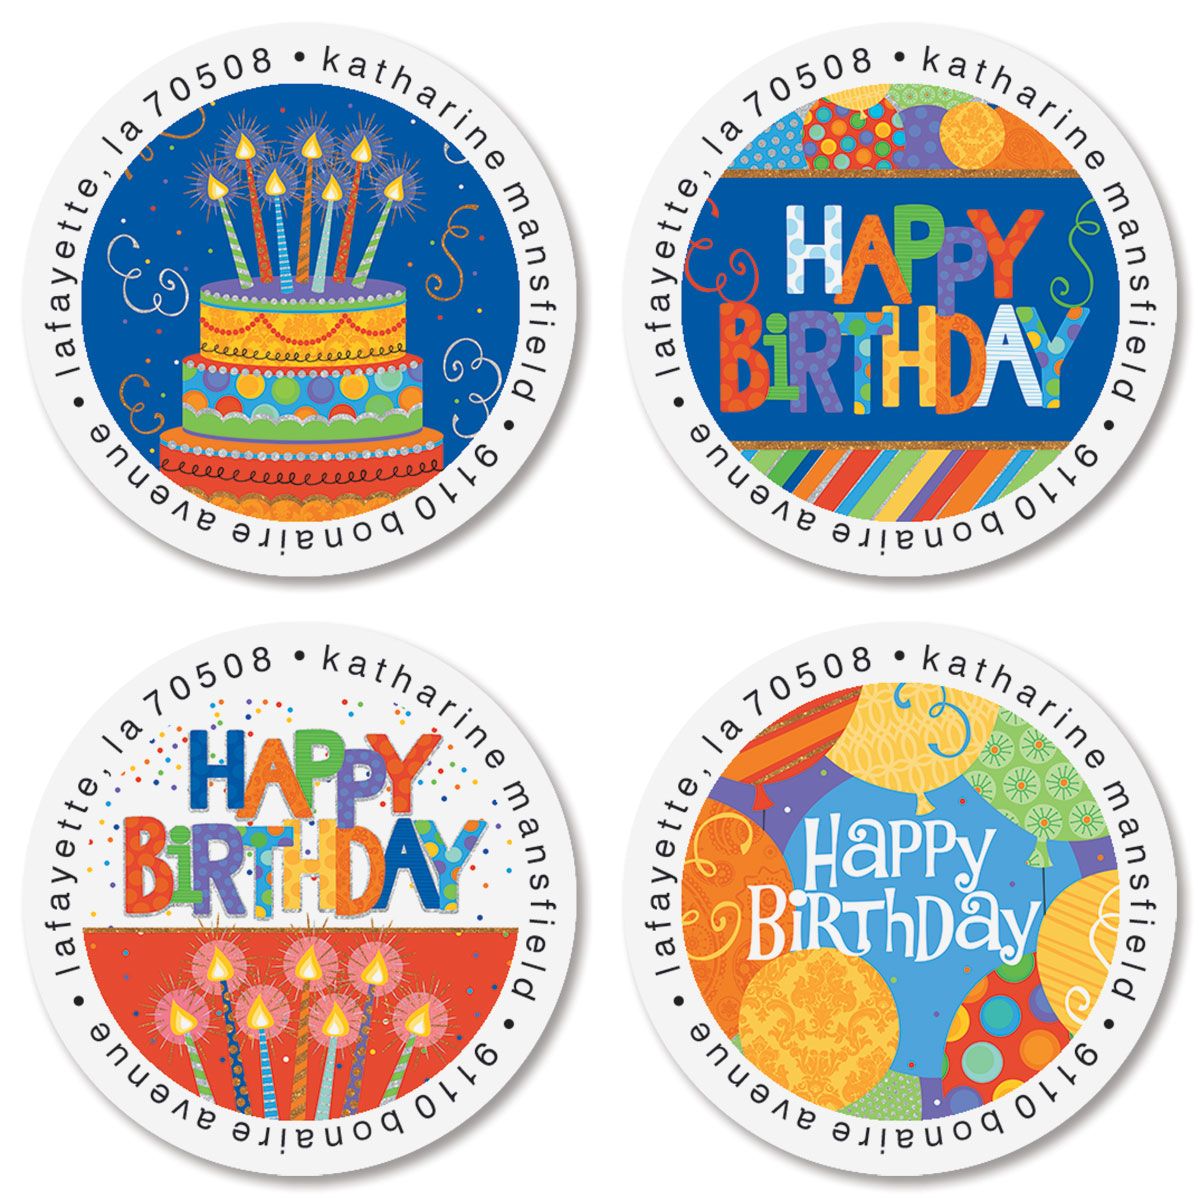 awesome-birthday-round-address-labels-4-designs-current-catalog